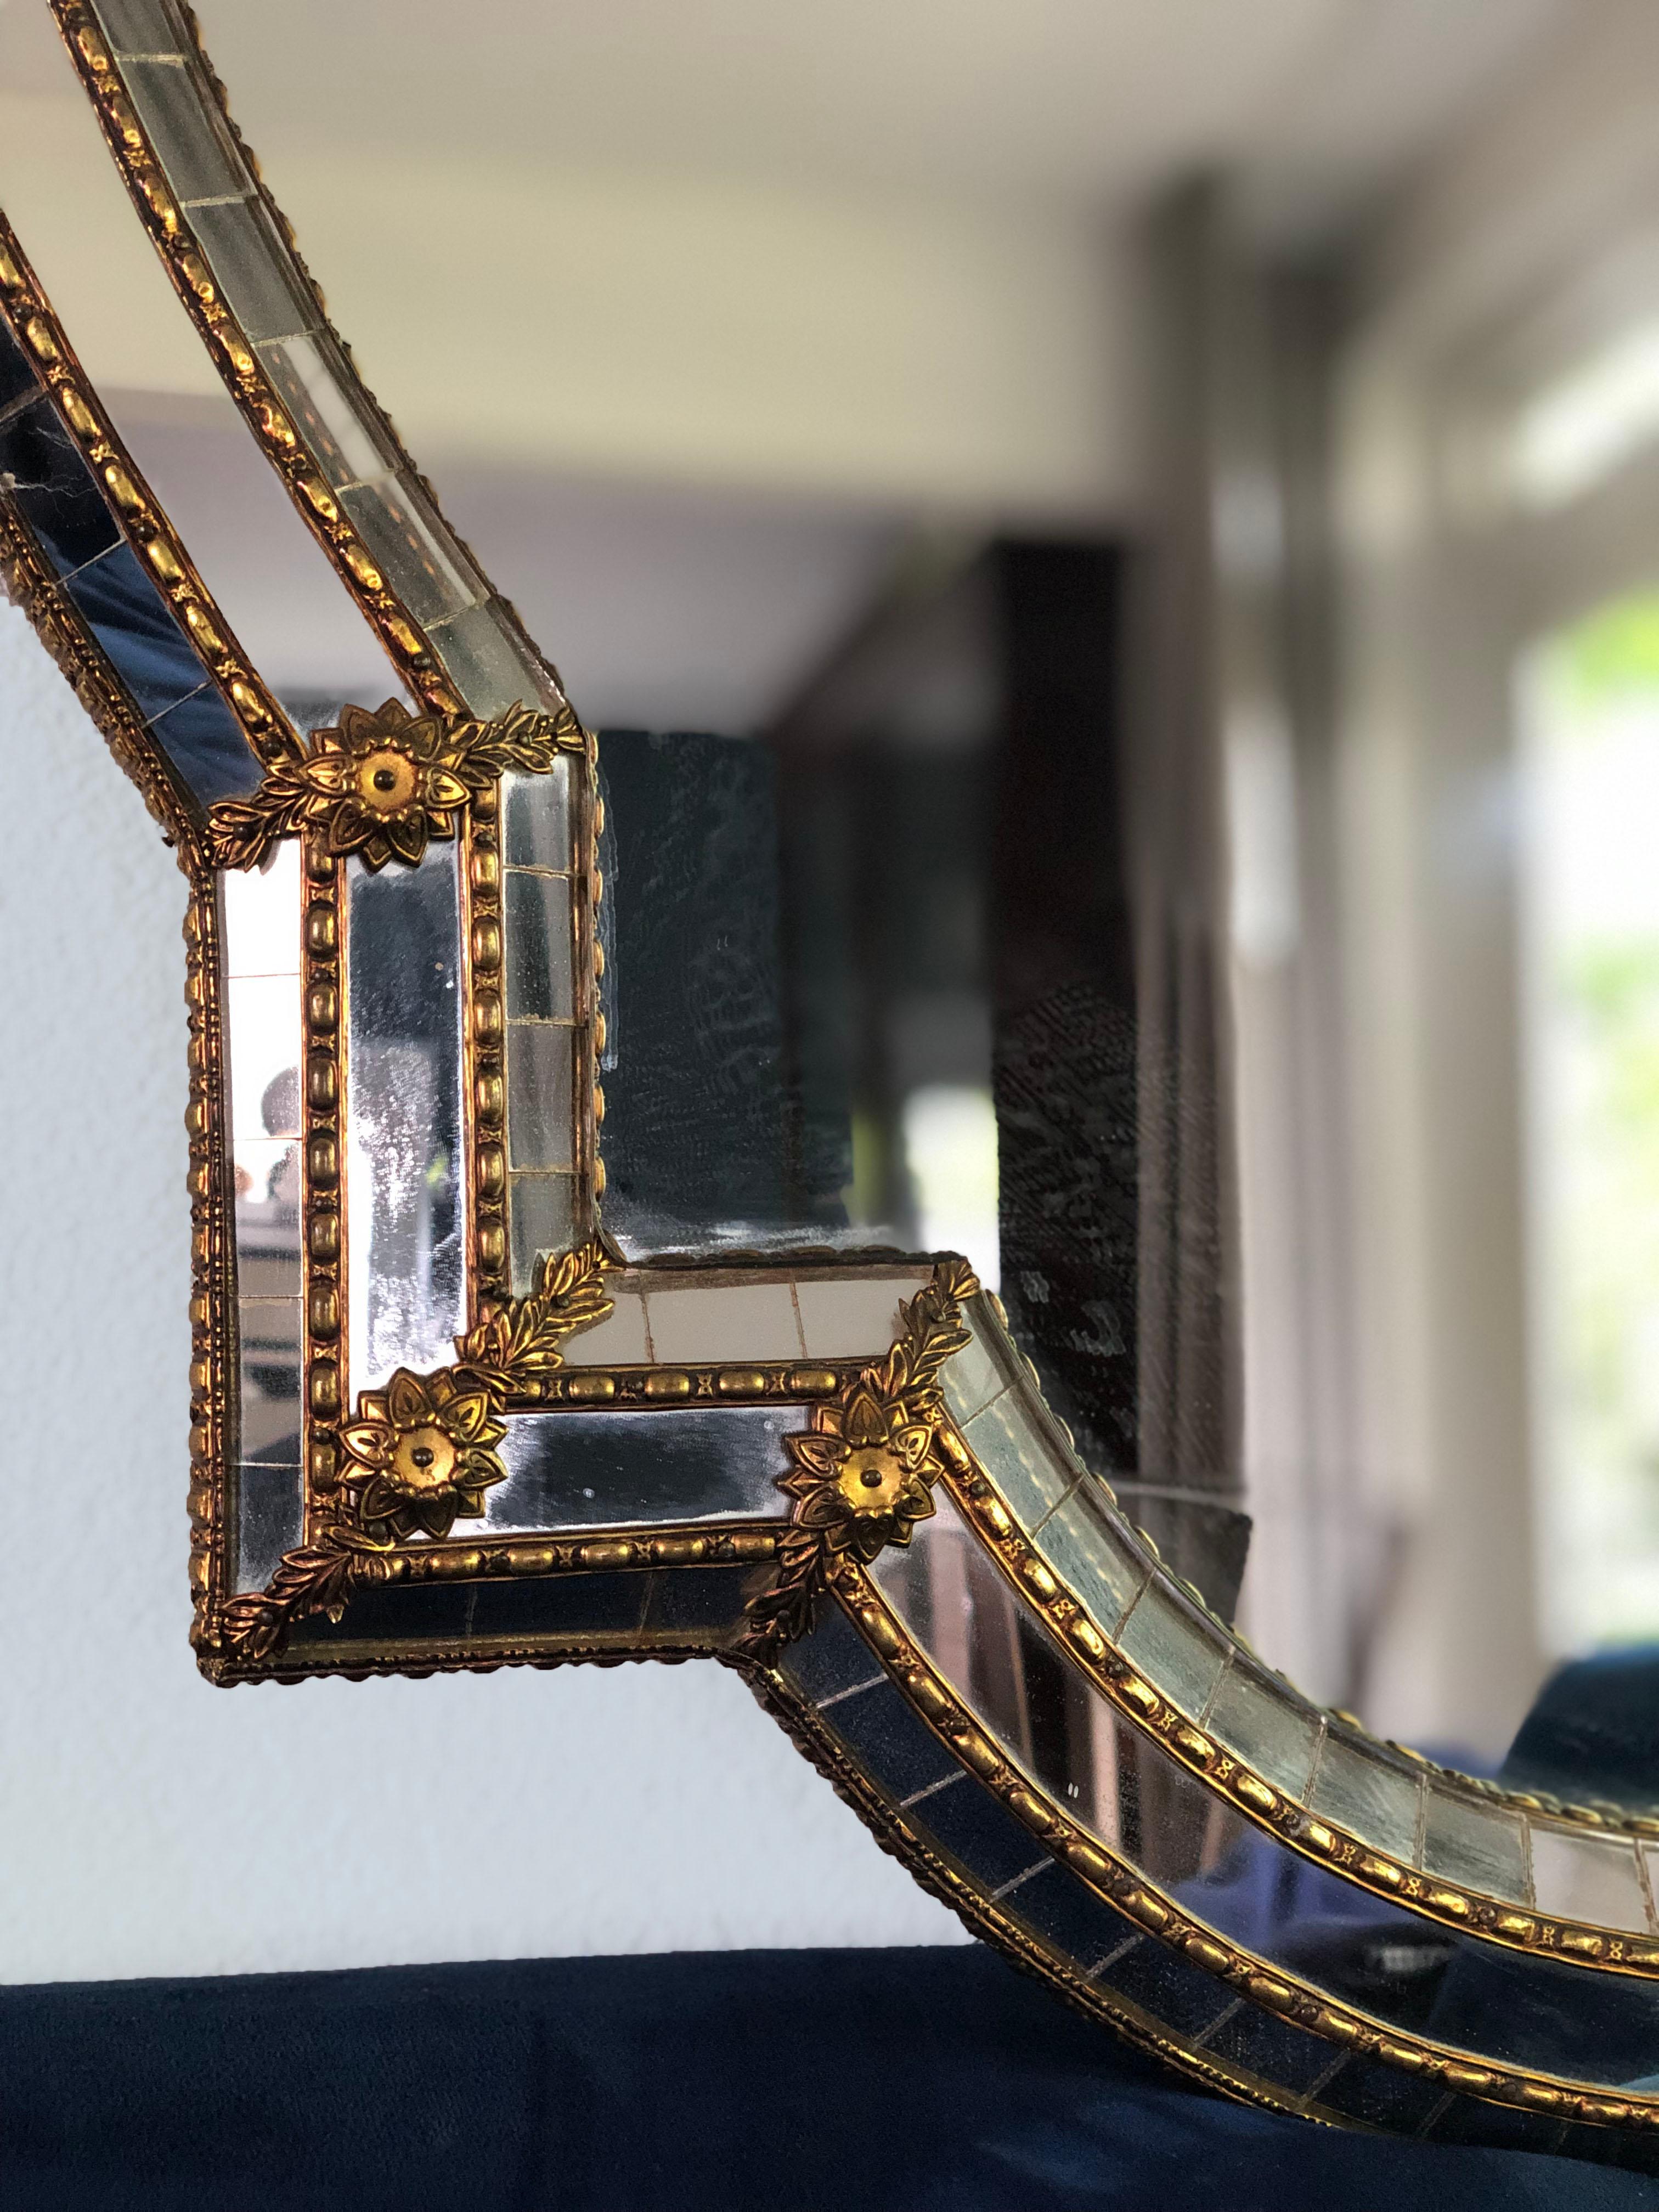 Beautiful handmade Venetian large mirror from Spain 1990s. The frame has cut glass panes across the entire width, which is held together by a brass strip. The trapezoidal mirror has a brass flower at each corner. The special shapes make the mirror